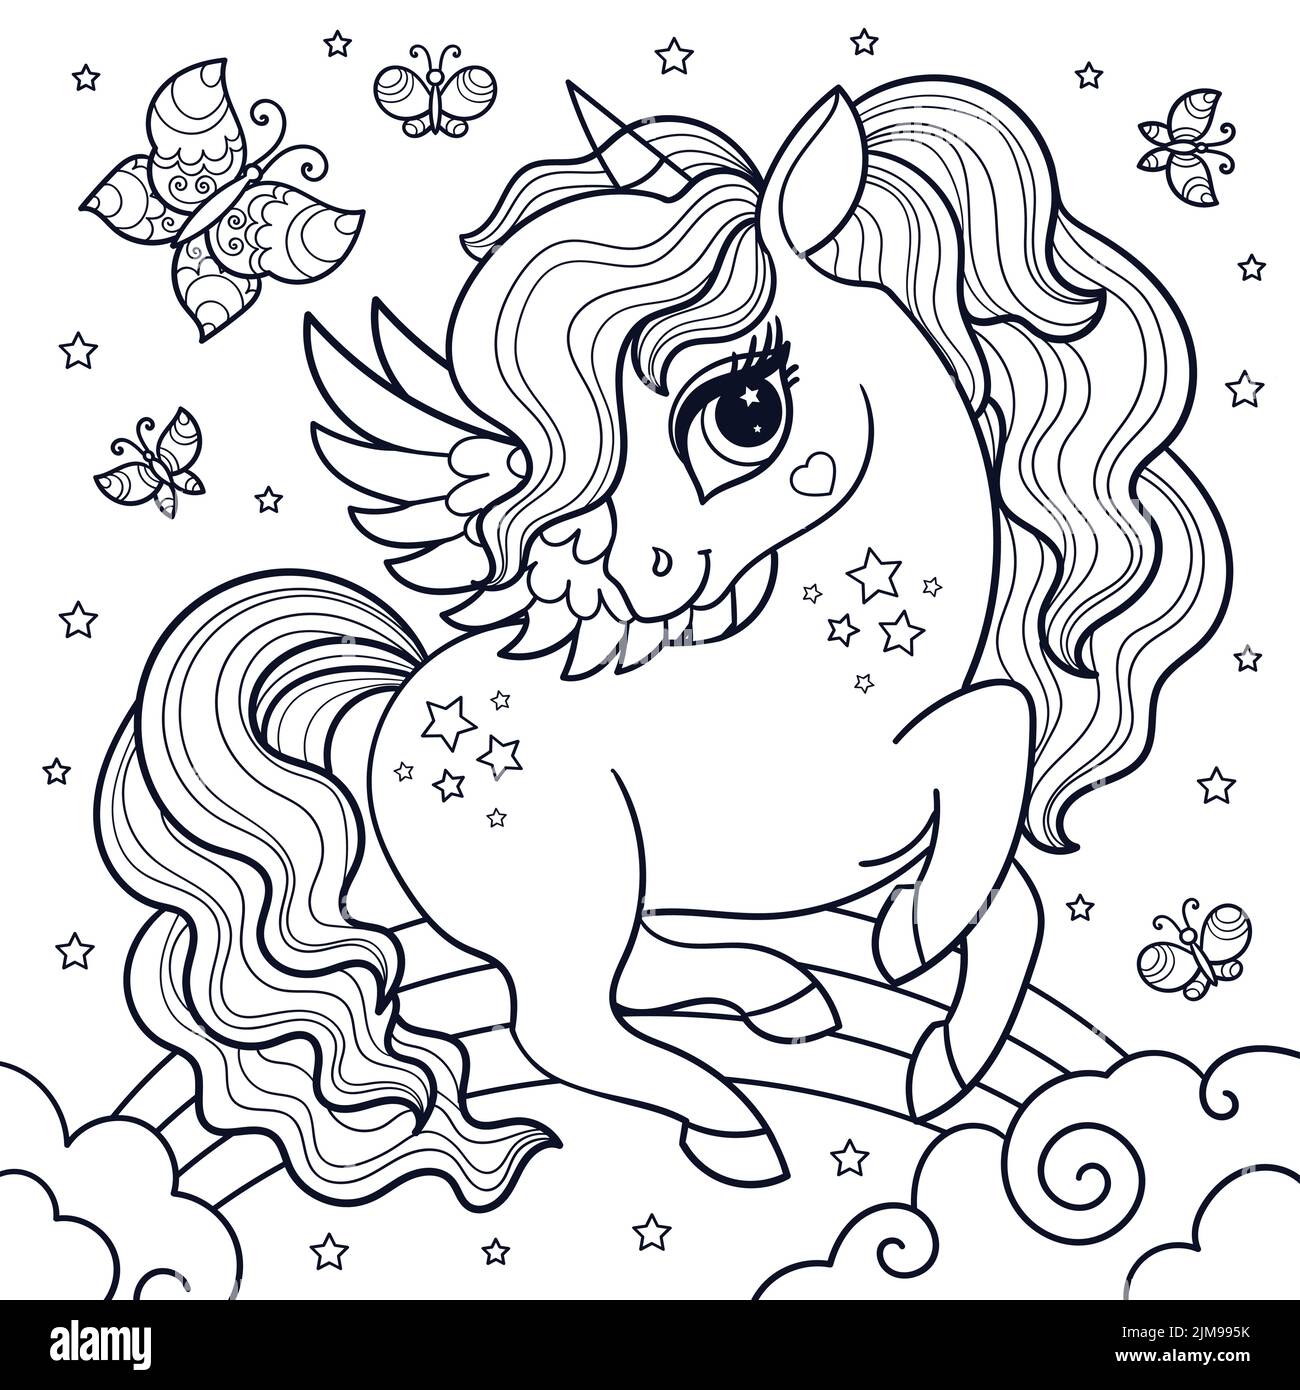 Cute cartoon unicorn with butterflies on the rainbow. Black and white linear drawing. For children's design of coloring books, prints, posters, cards, Stock Vector